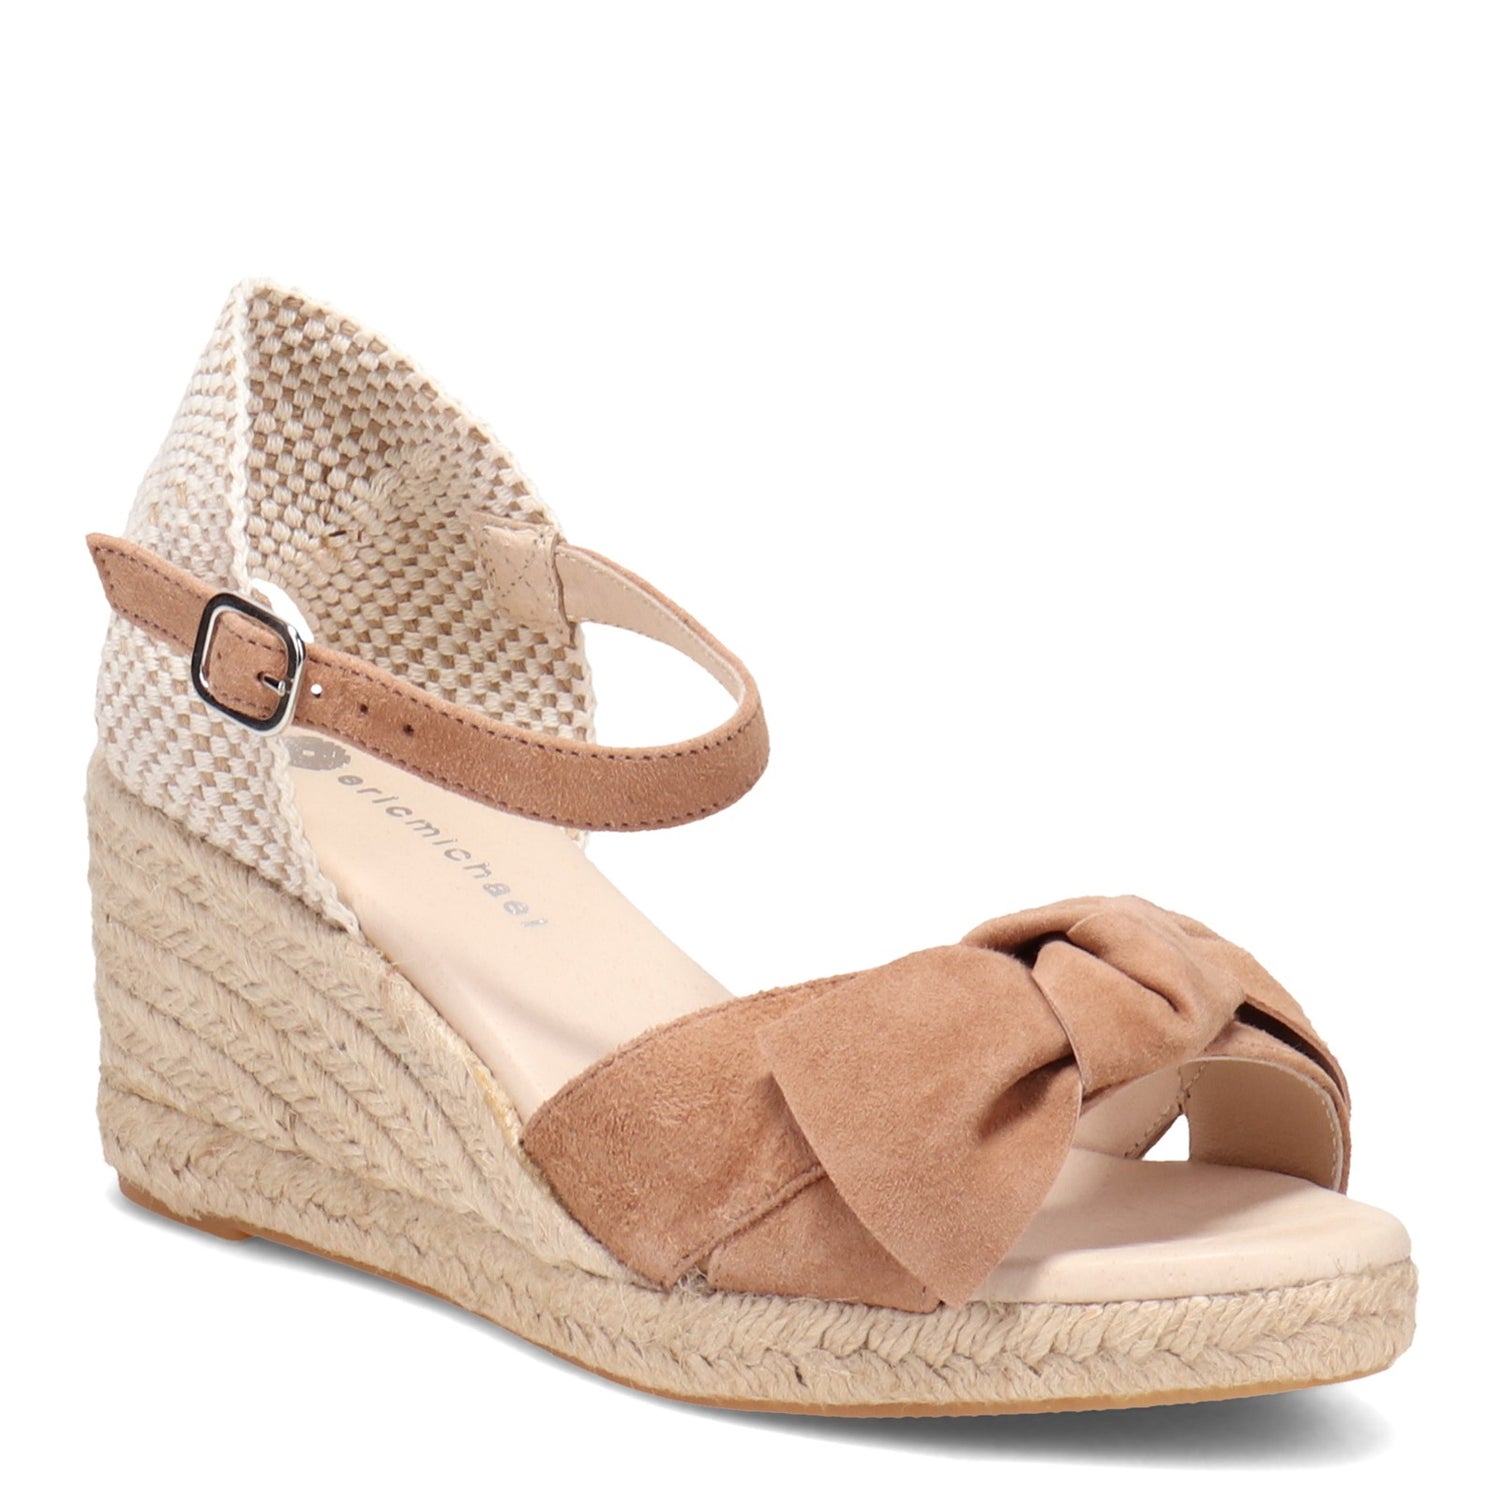 Peltz Shoes  Women's Eric Michael Gwenith Sandal TAUPE GWENITH-TAUPE